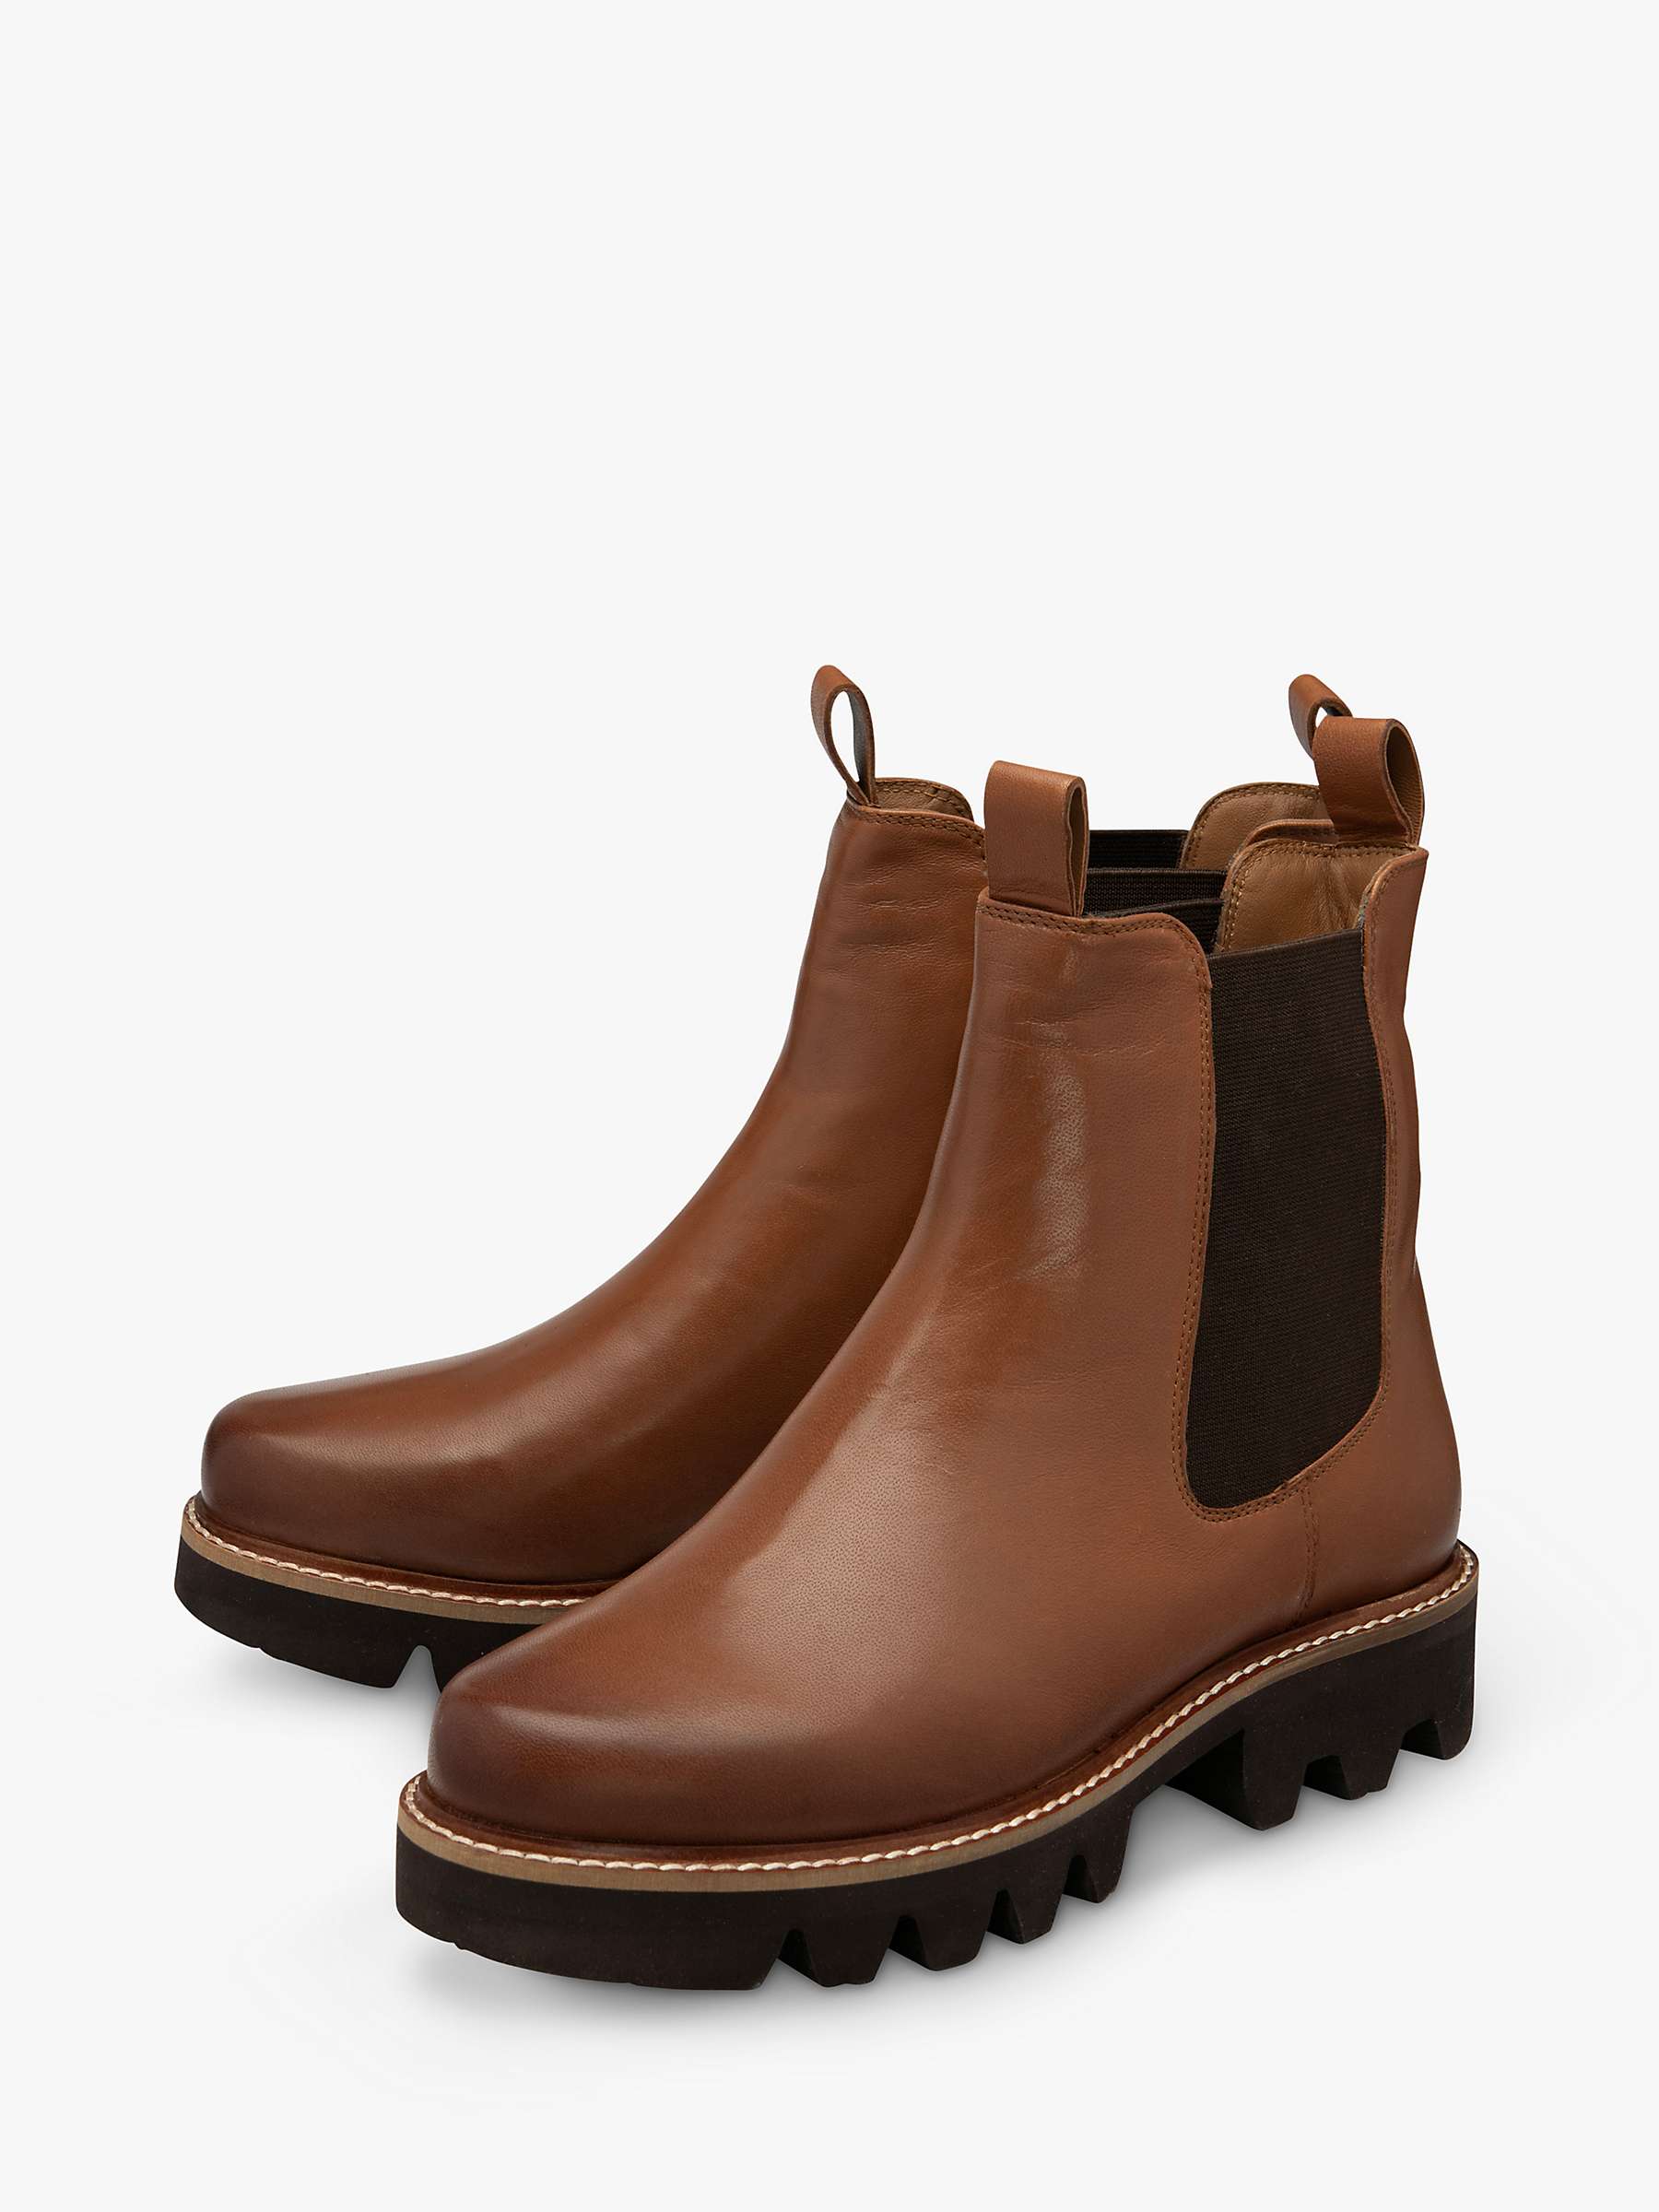 Buy Ravel Women's Abbey Leather Ankle Boots, Tan Online at johnlewis.com